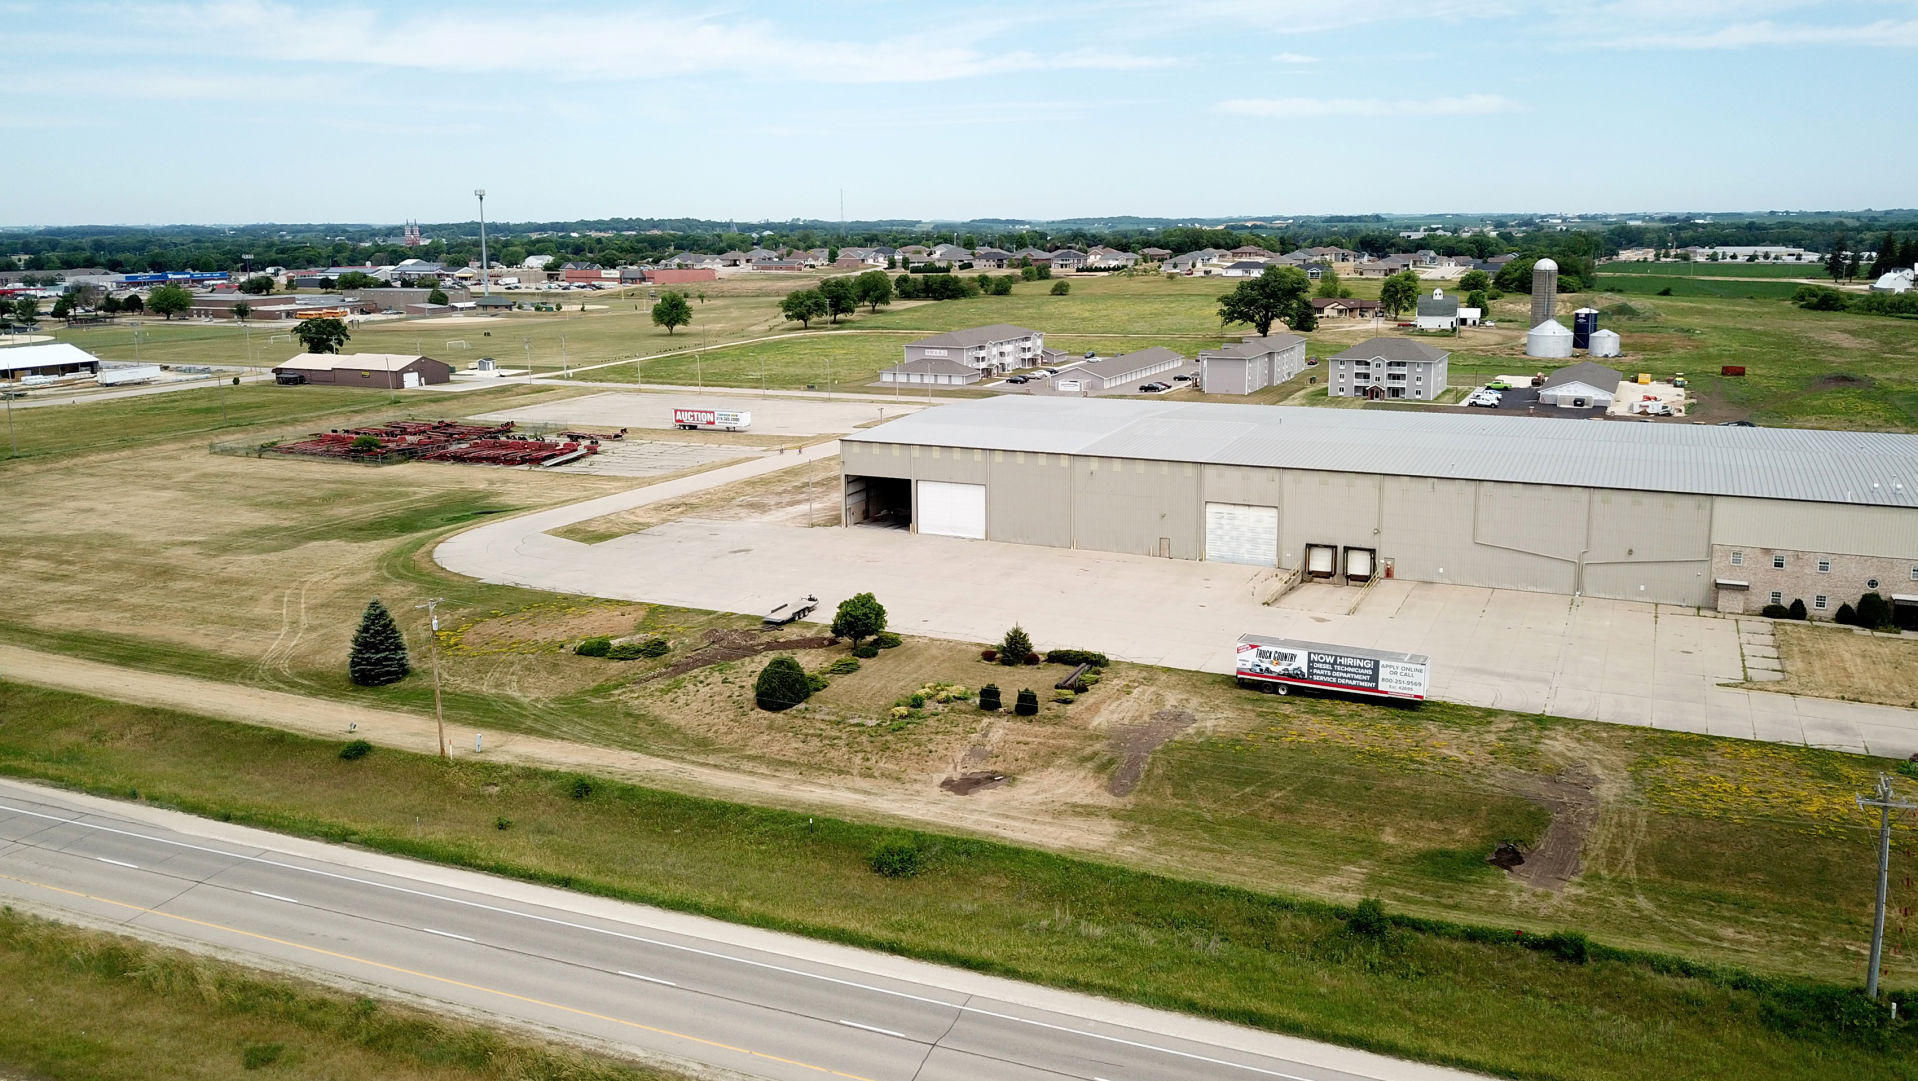 Truck Country will open its second Dubuque County site in the former All American Homes building at 1551 15th Ave. SE in Dyersville, Iowa. PHOTO CREDIT: JESSICA REILLY